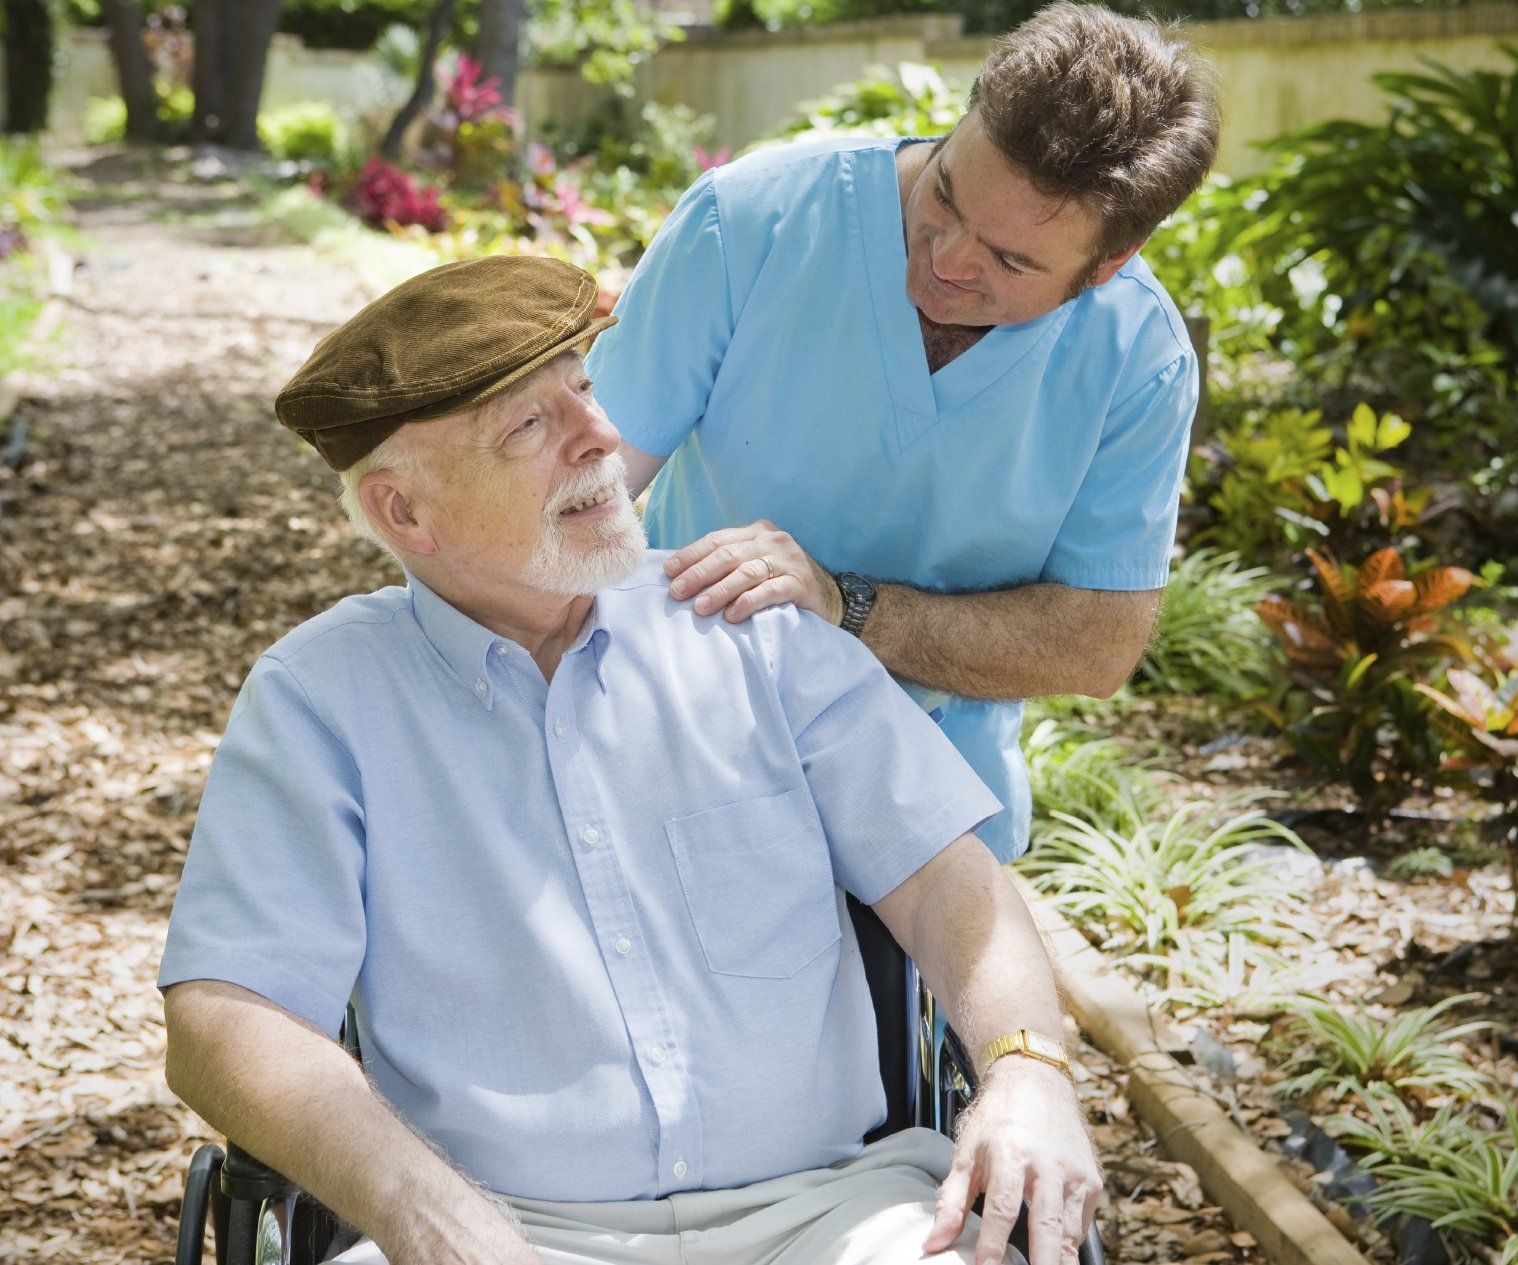 An elderly man in a wheelchair, being assisted by a male nurse.